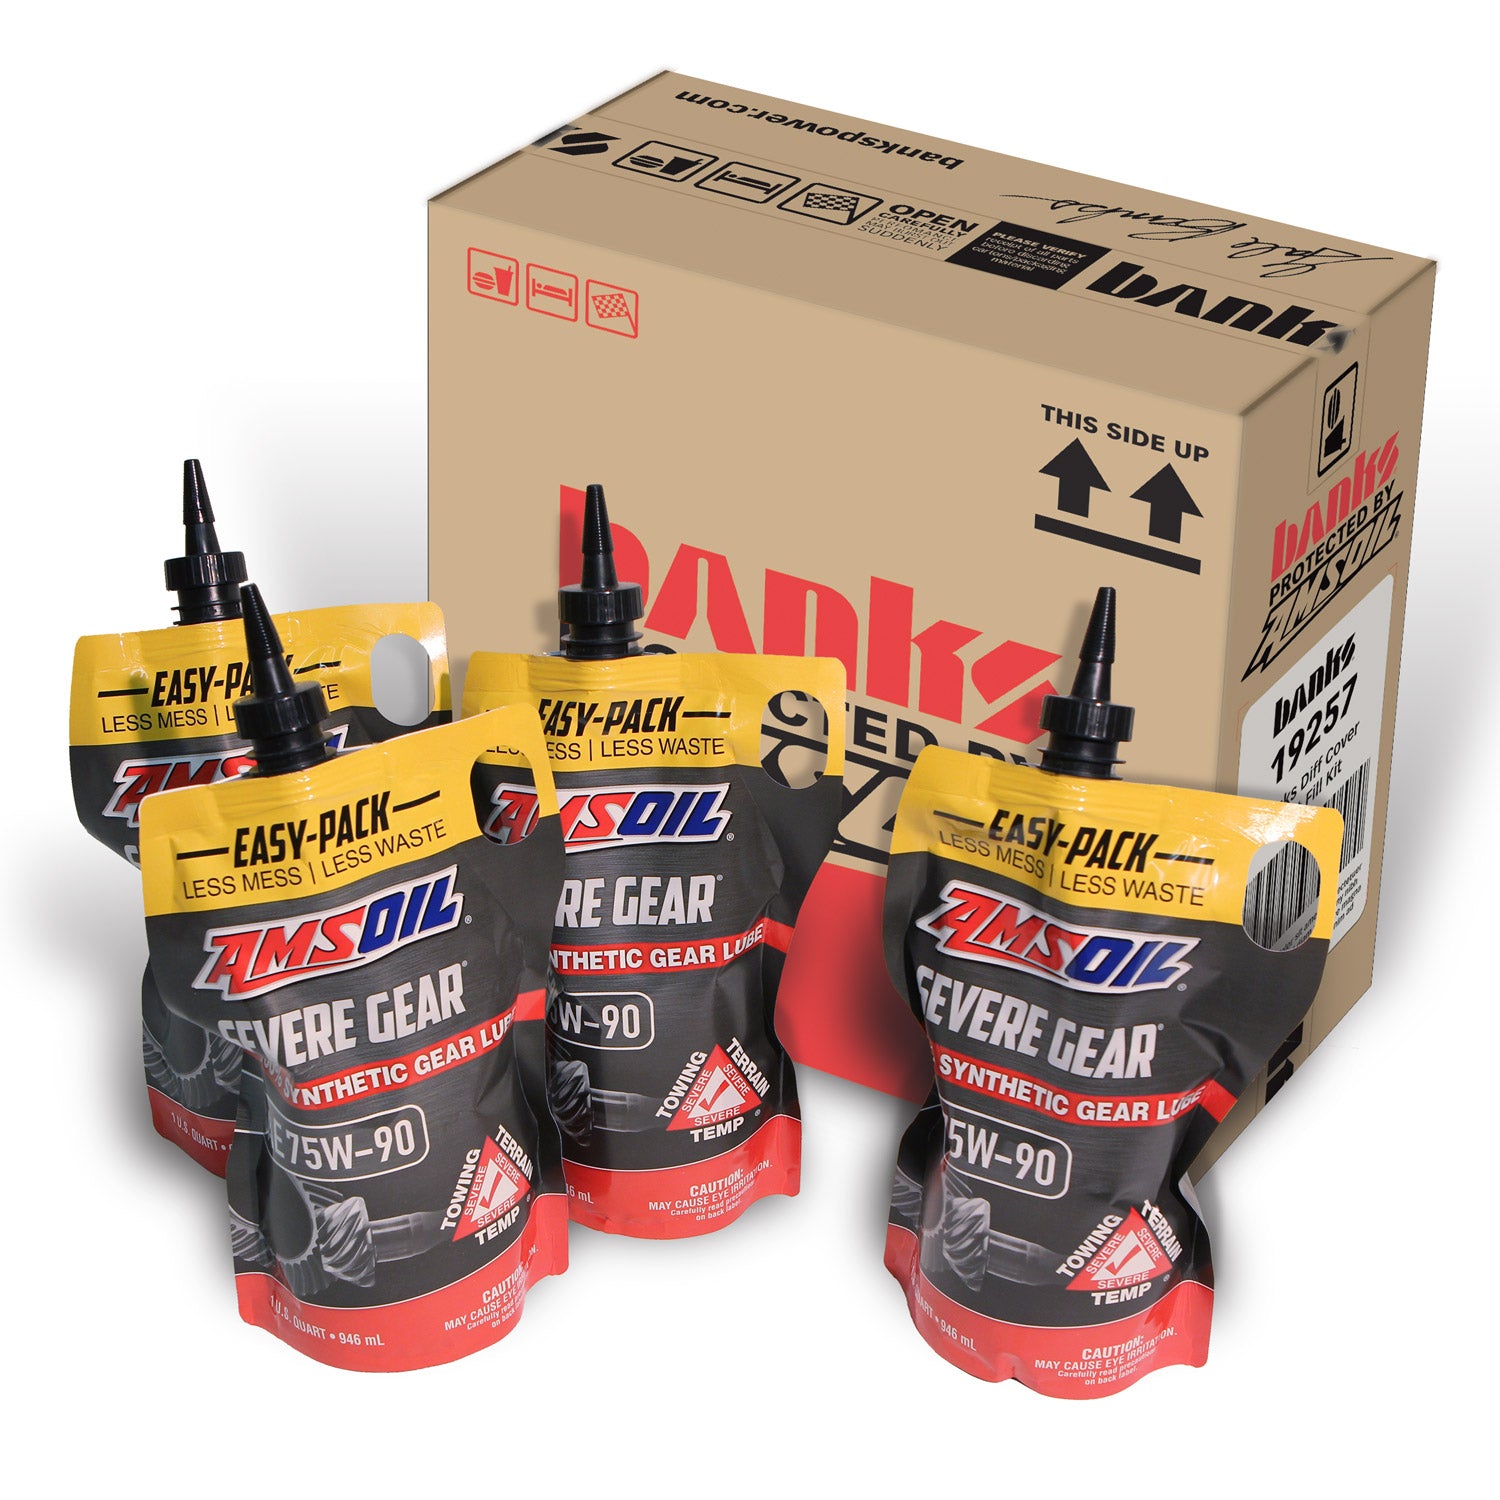 Image of 4 Amsoil lubricant pouches